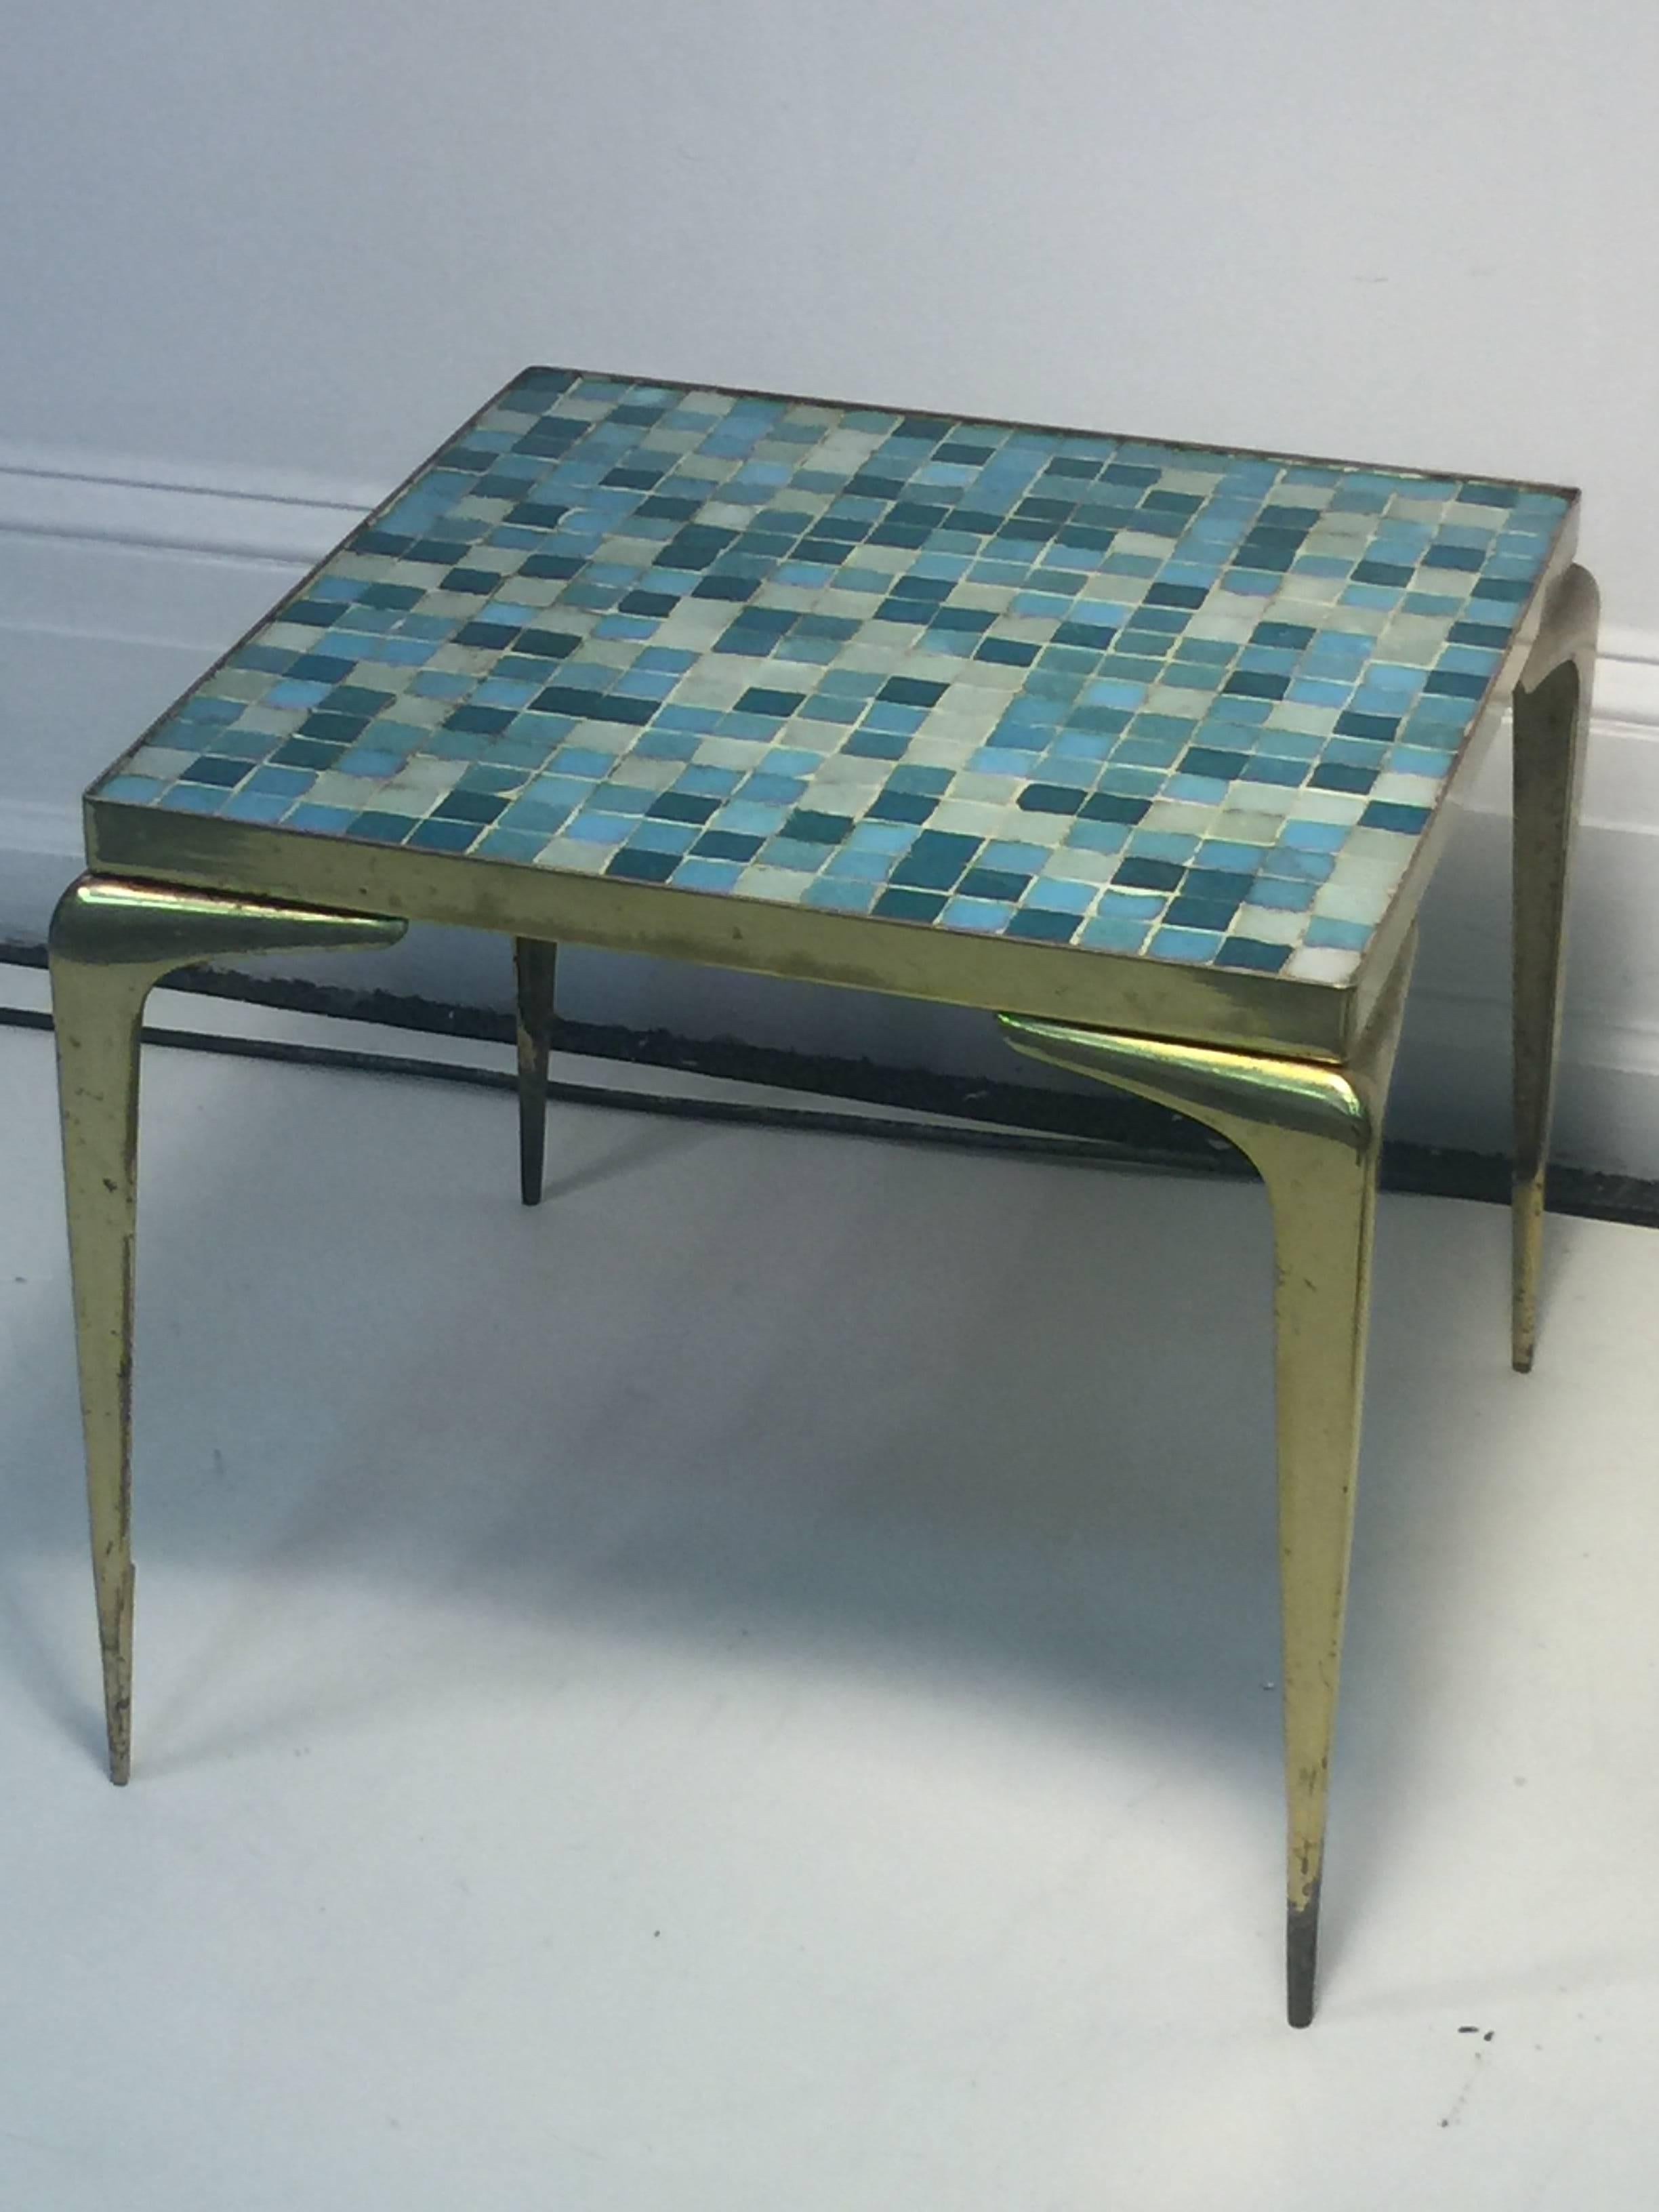 Italian brass framed table with top of aqua, cobalt and white Murano glass square tiles. Flared and tapered legs give this table a dynamic edge.